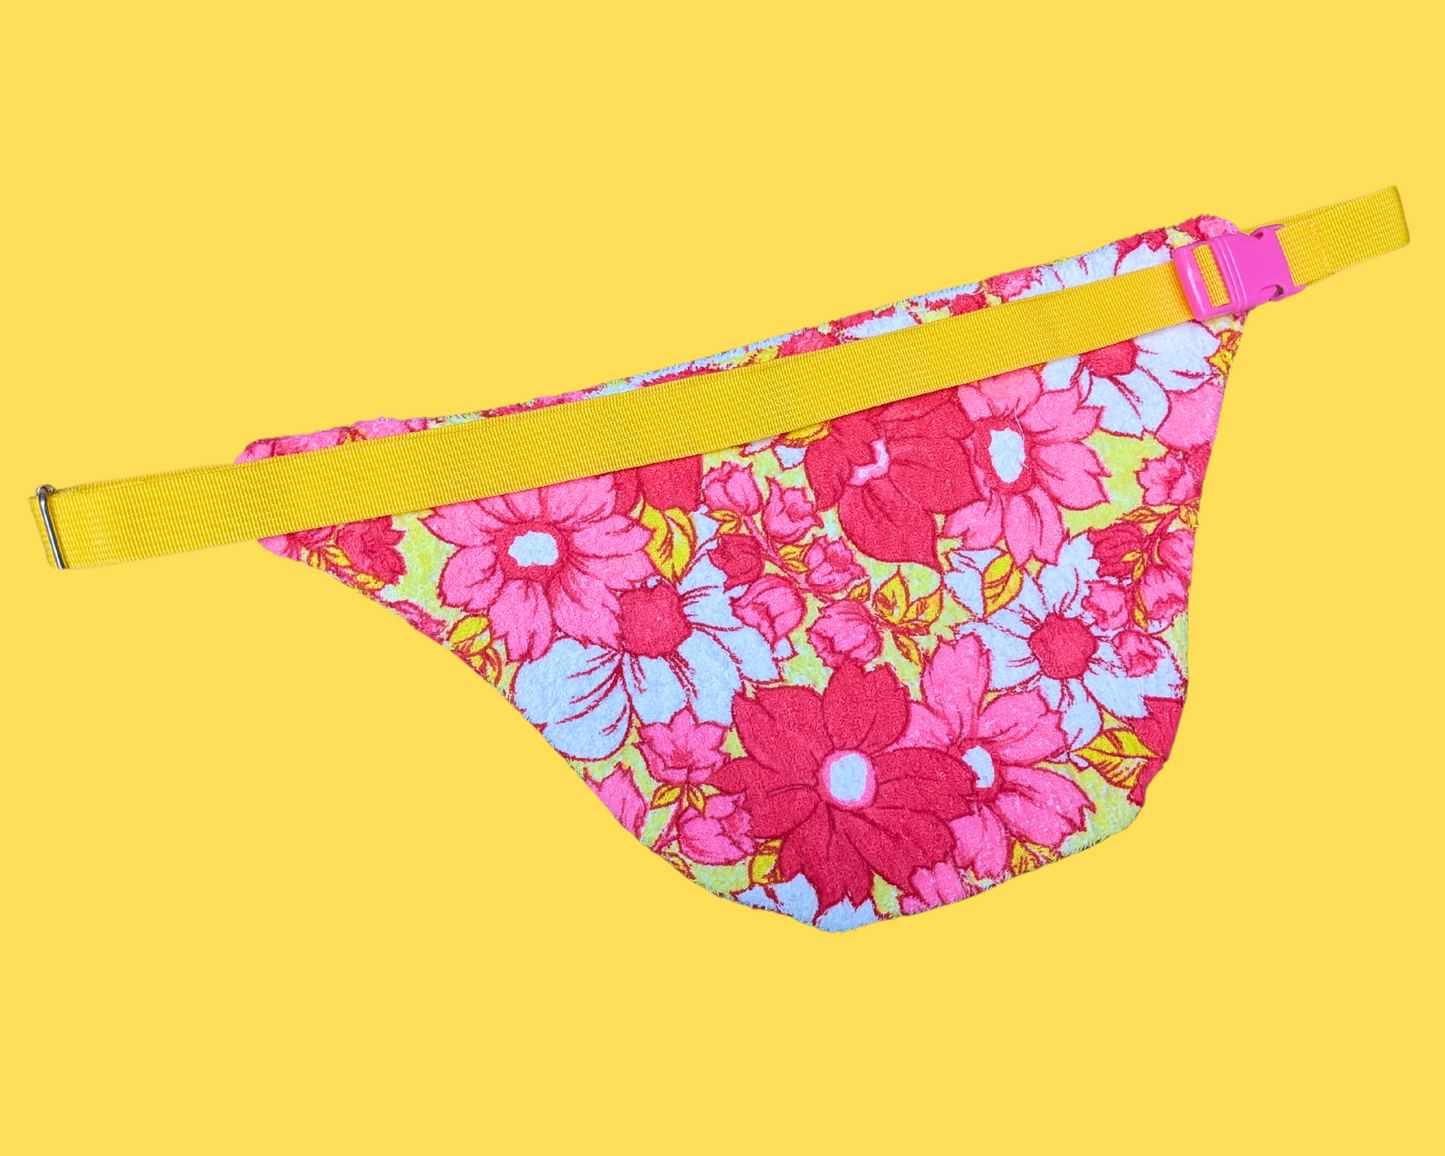 Handmade, Upcycled Towel Colourful Floral Print Fanny Pack